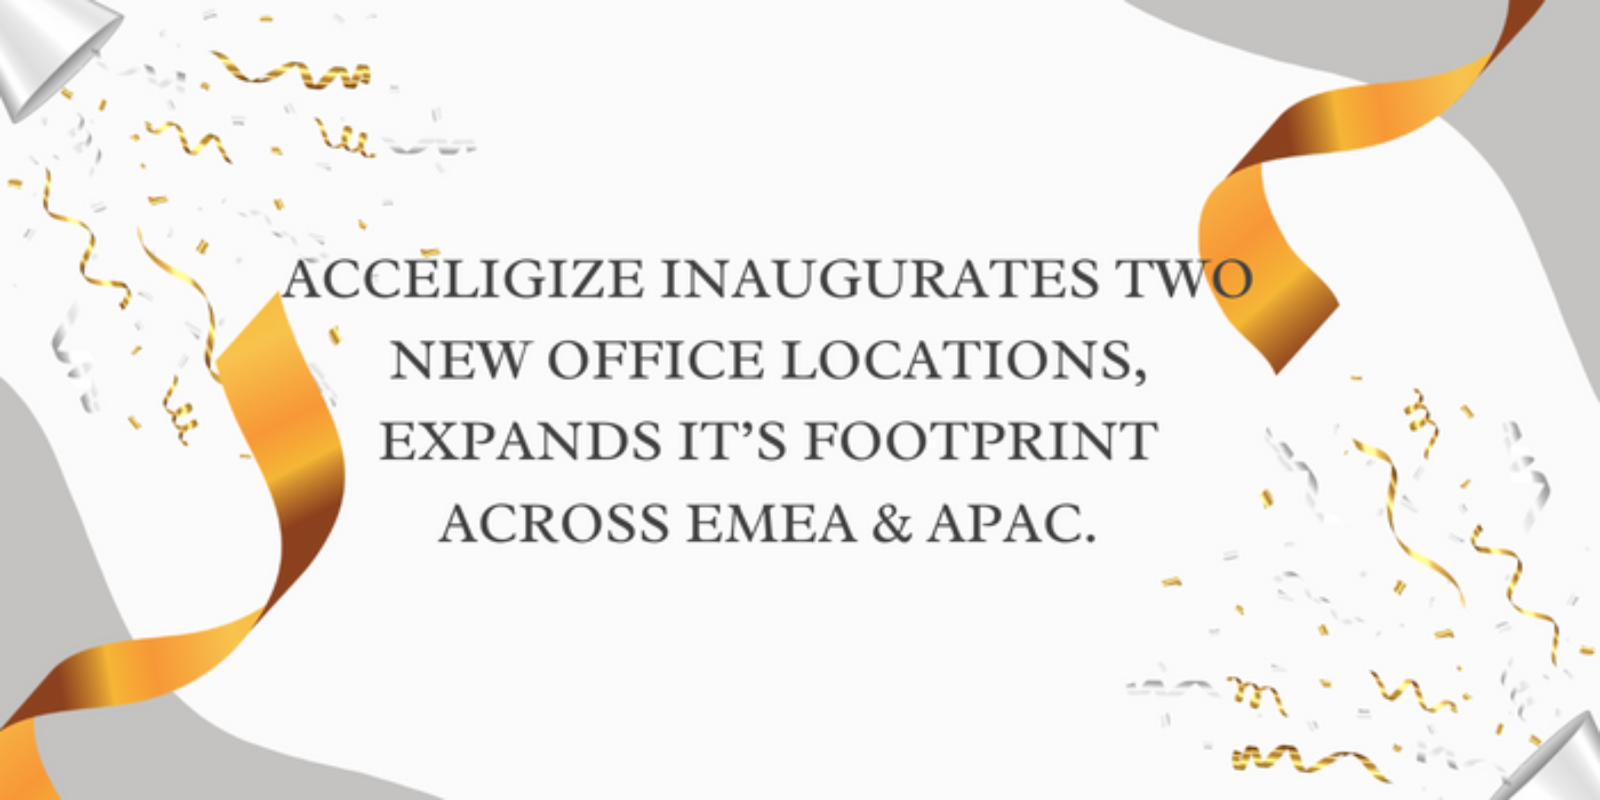 ACCELIGIZE INAUGURATES TWO NEW OFFICE LOCATIONS, EXPANDS IT’S FOOTPRINT ACROSS EMEA & APAC.